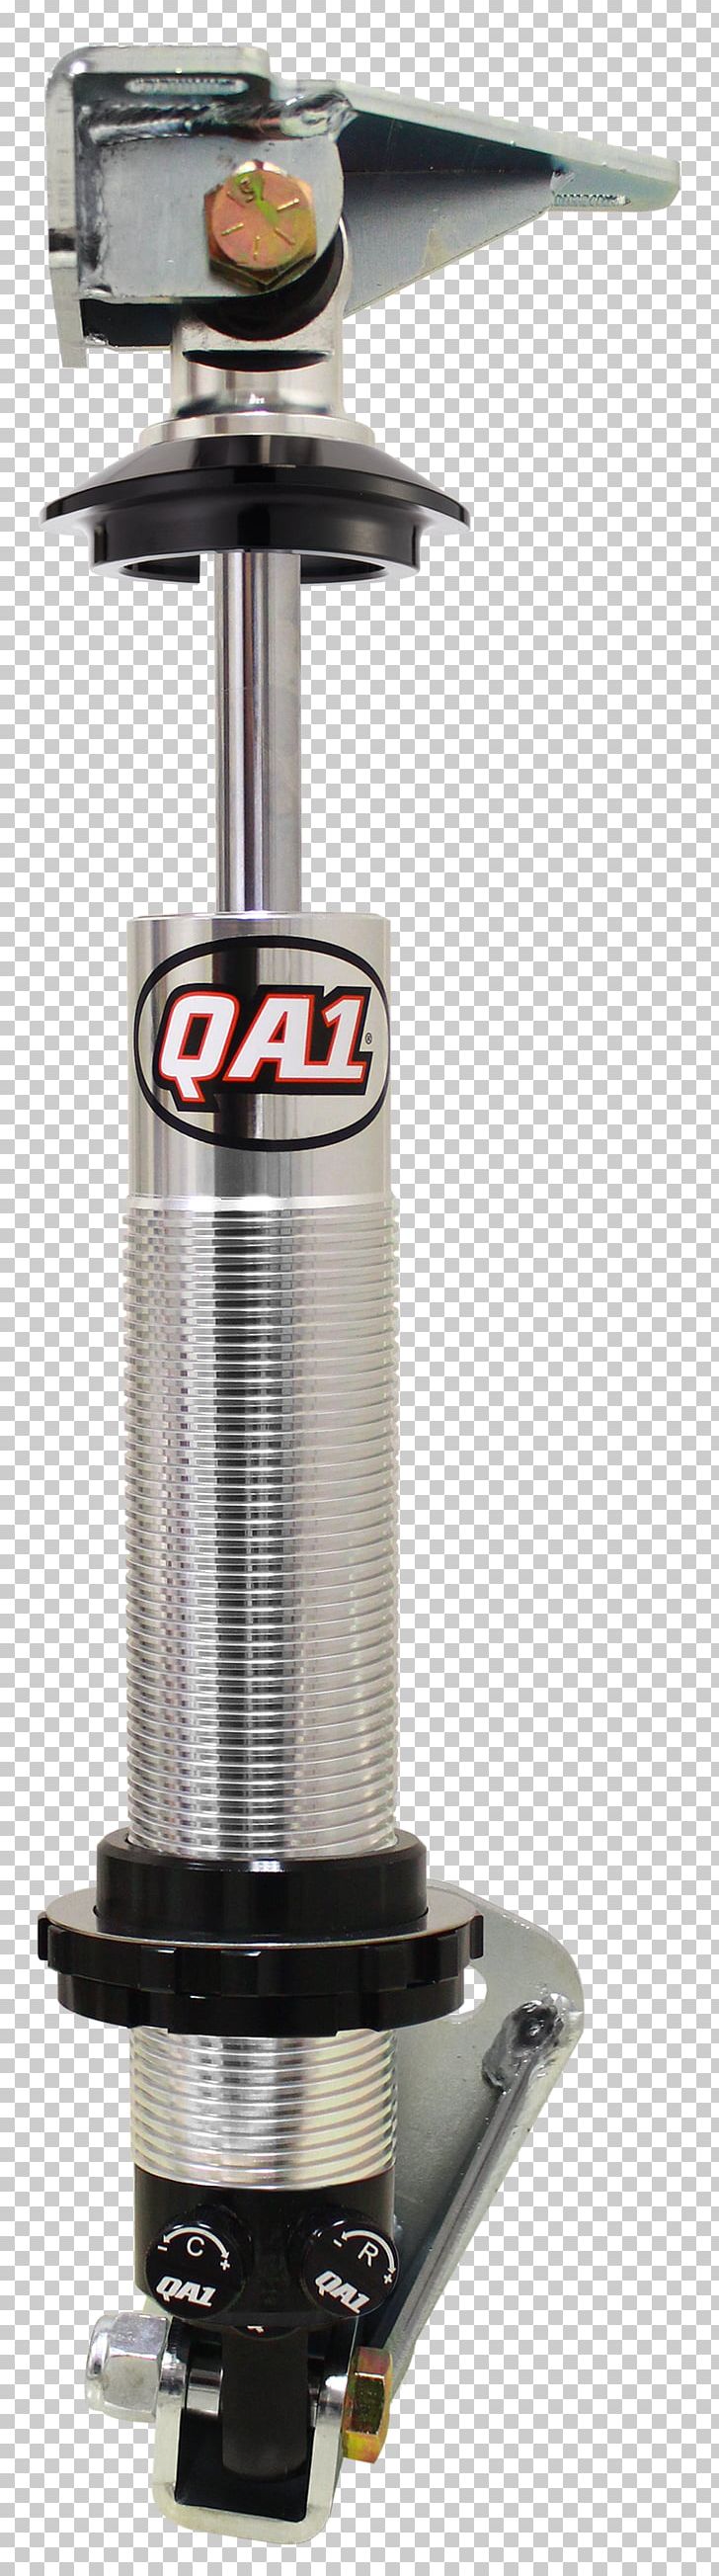 Chevrolet Chevelle General Motors Coilover QA1 Precision Products Inc Shock Absorber PNG, Clipart, Absorber, Cars, Chevelle, Chevrolet, Chevrolet Chevelle Free PNG Download